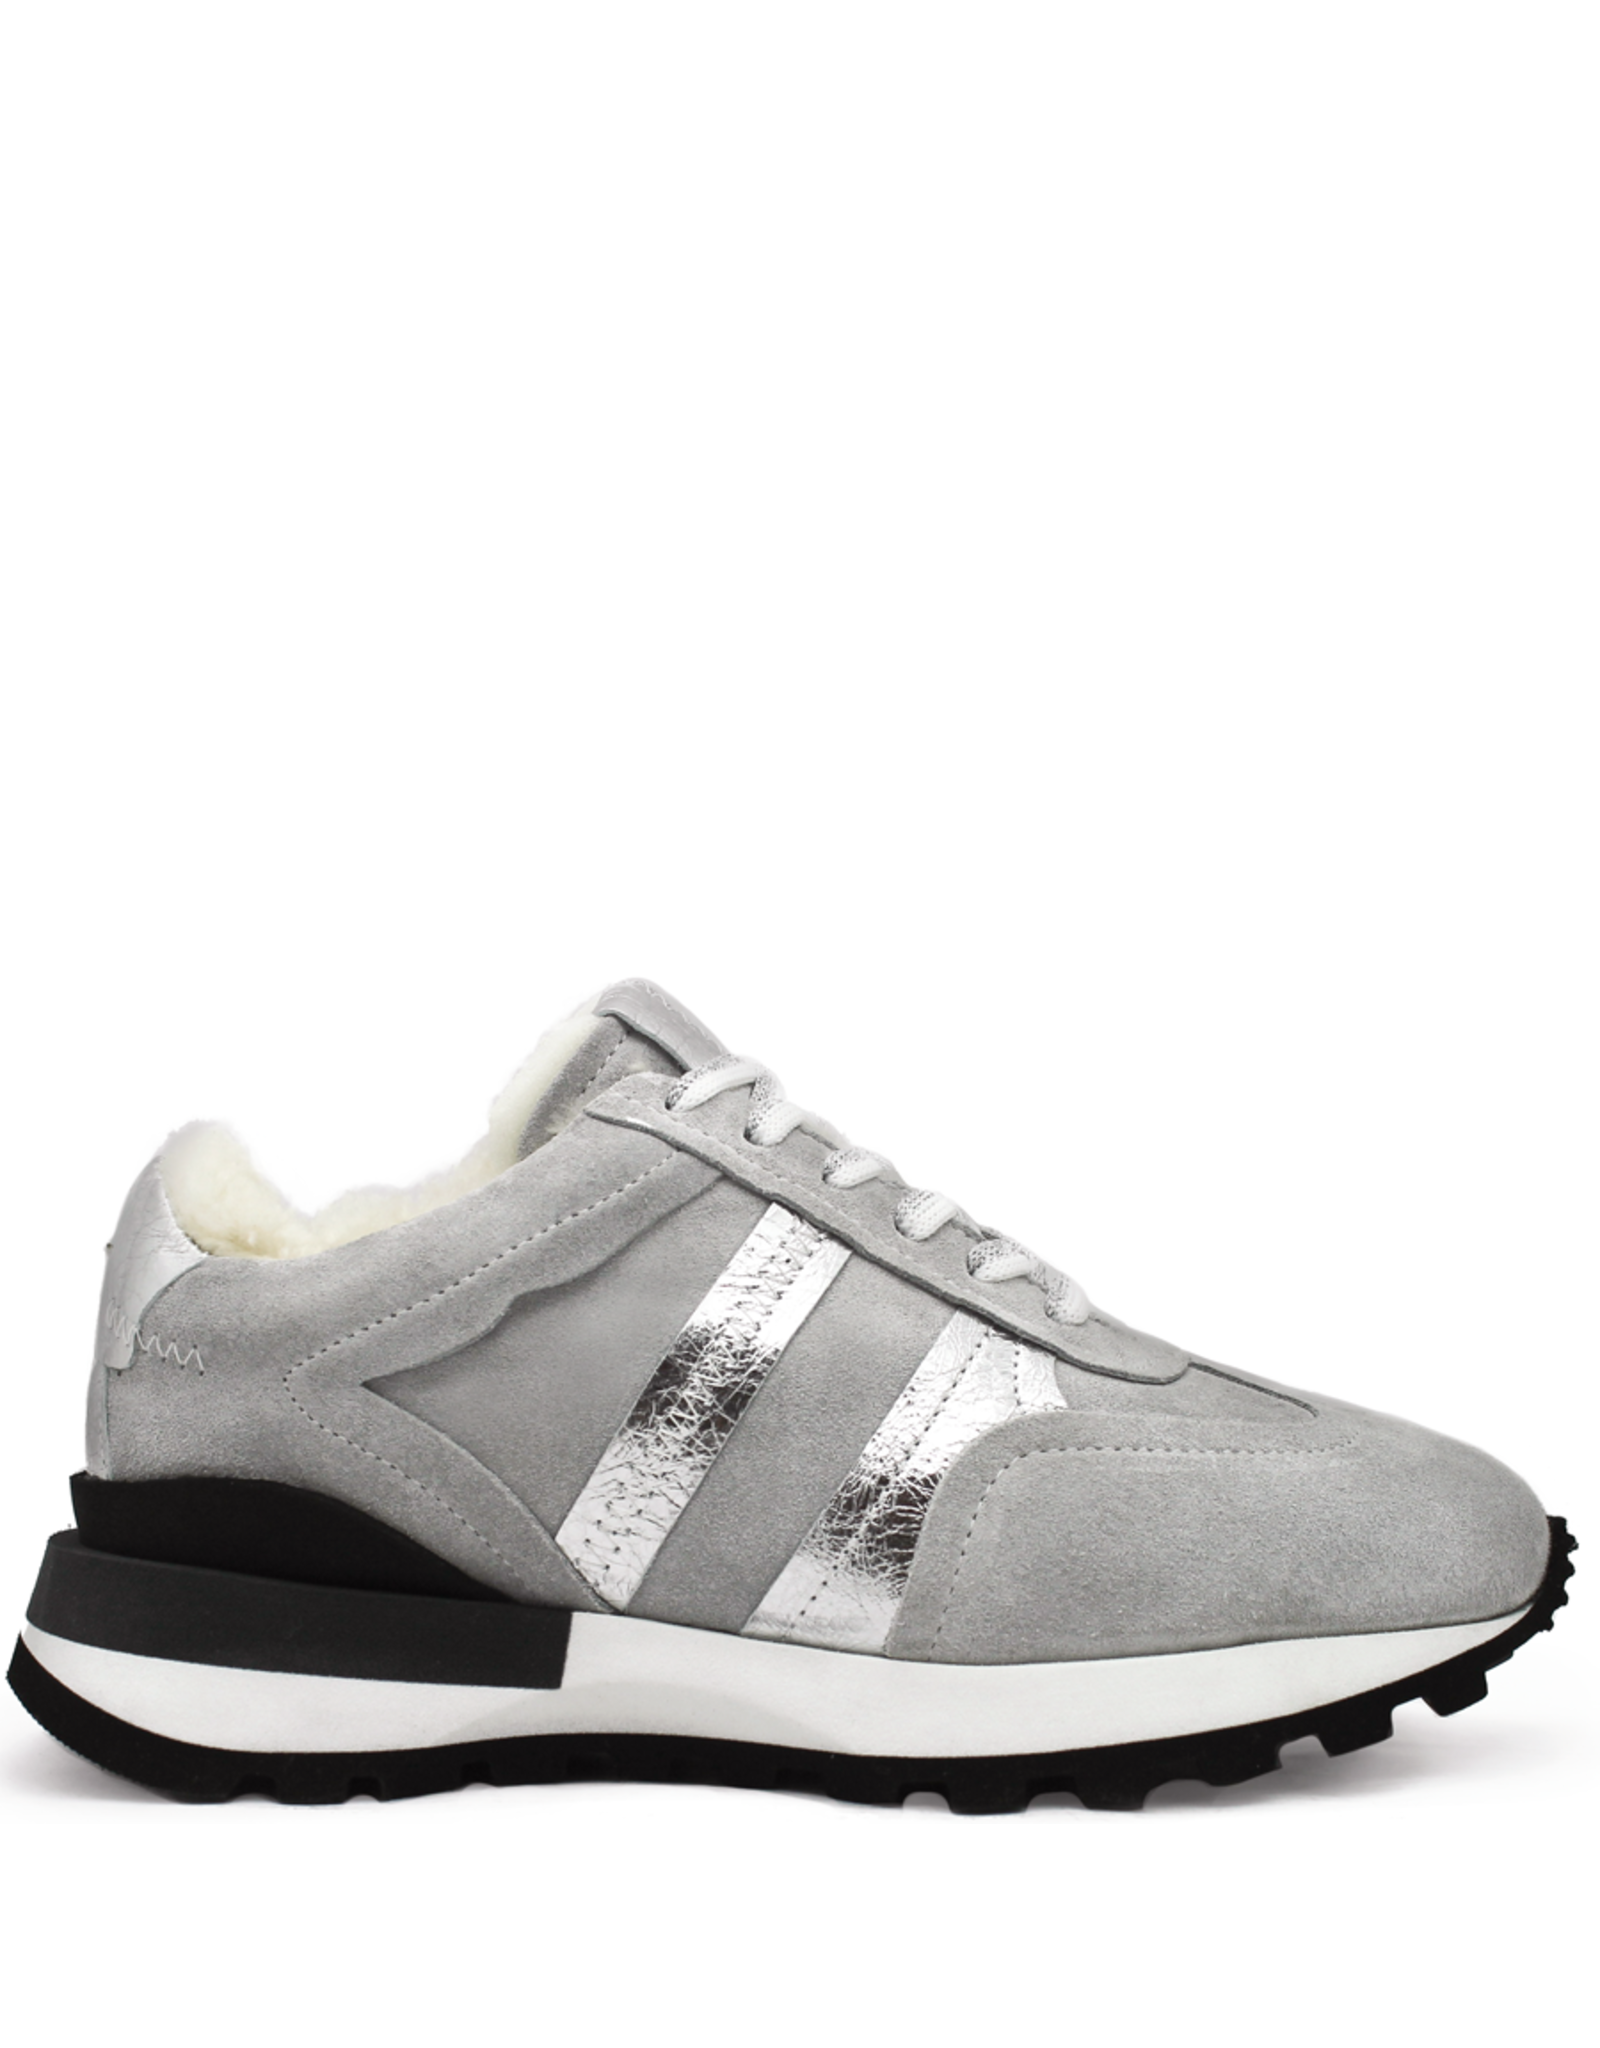 Now Now N43H Grey With Silver Sneaker 8548